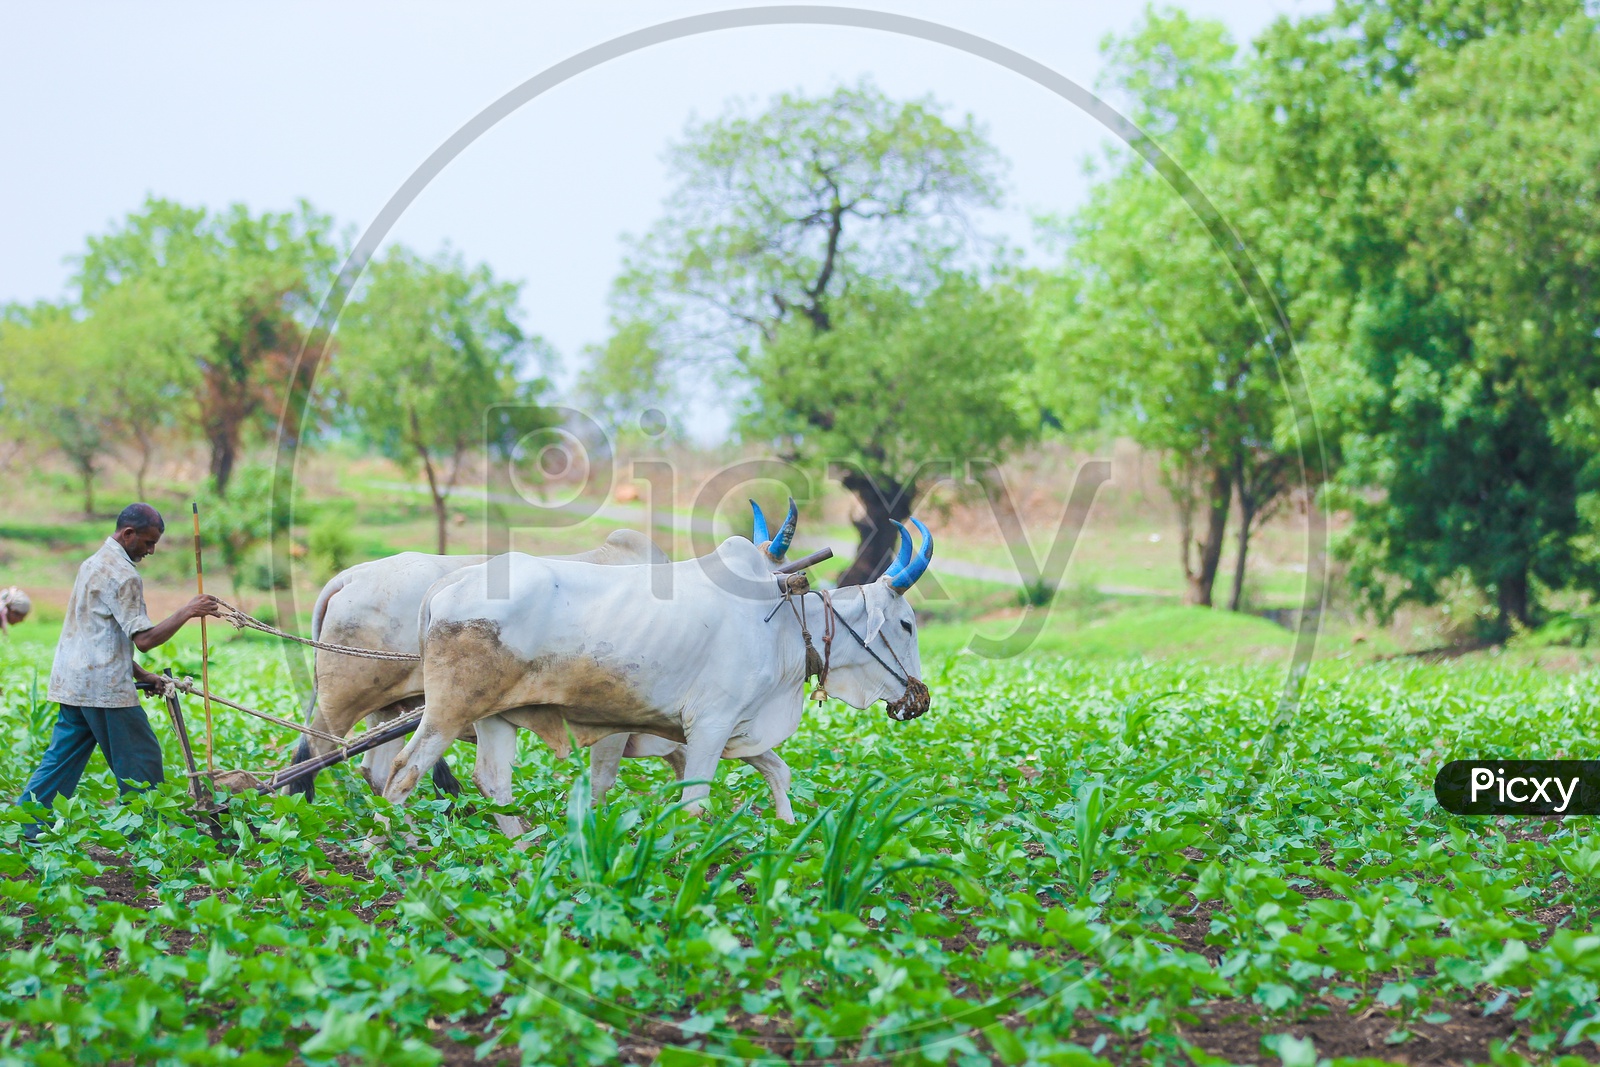 An Indian Farmer Ploughing  green  Cotton Field With Bullocks